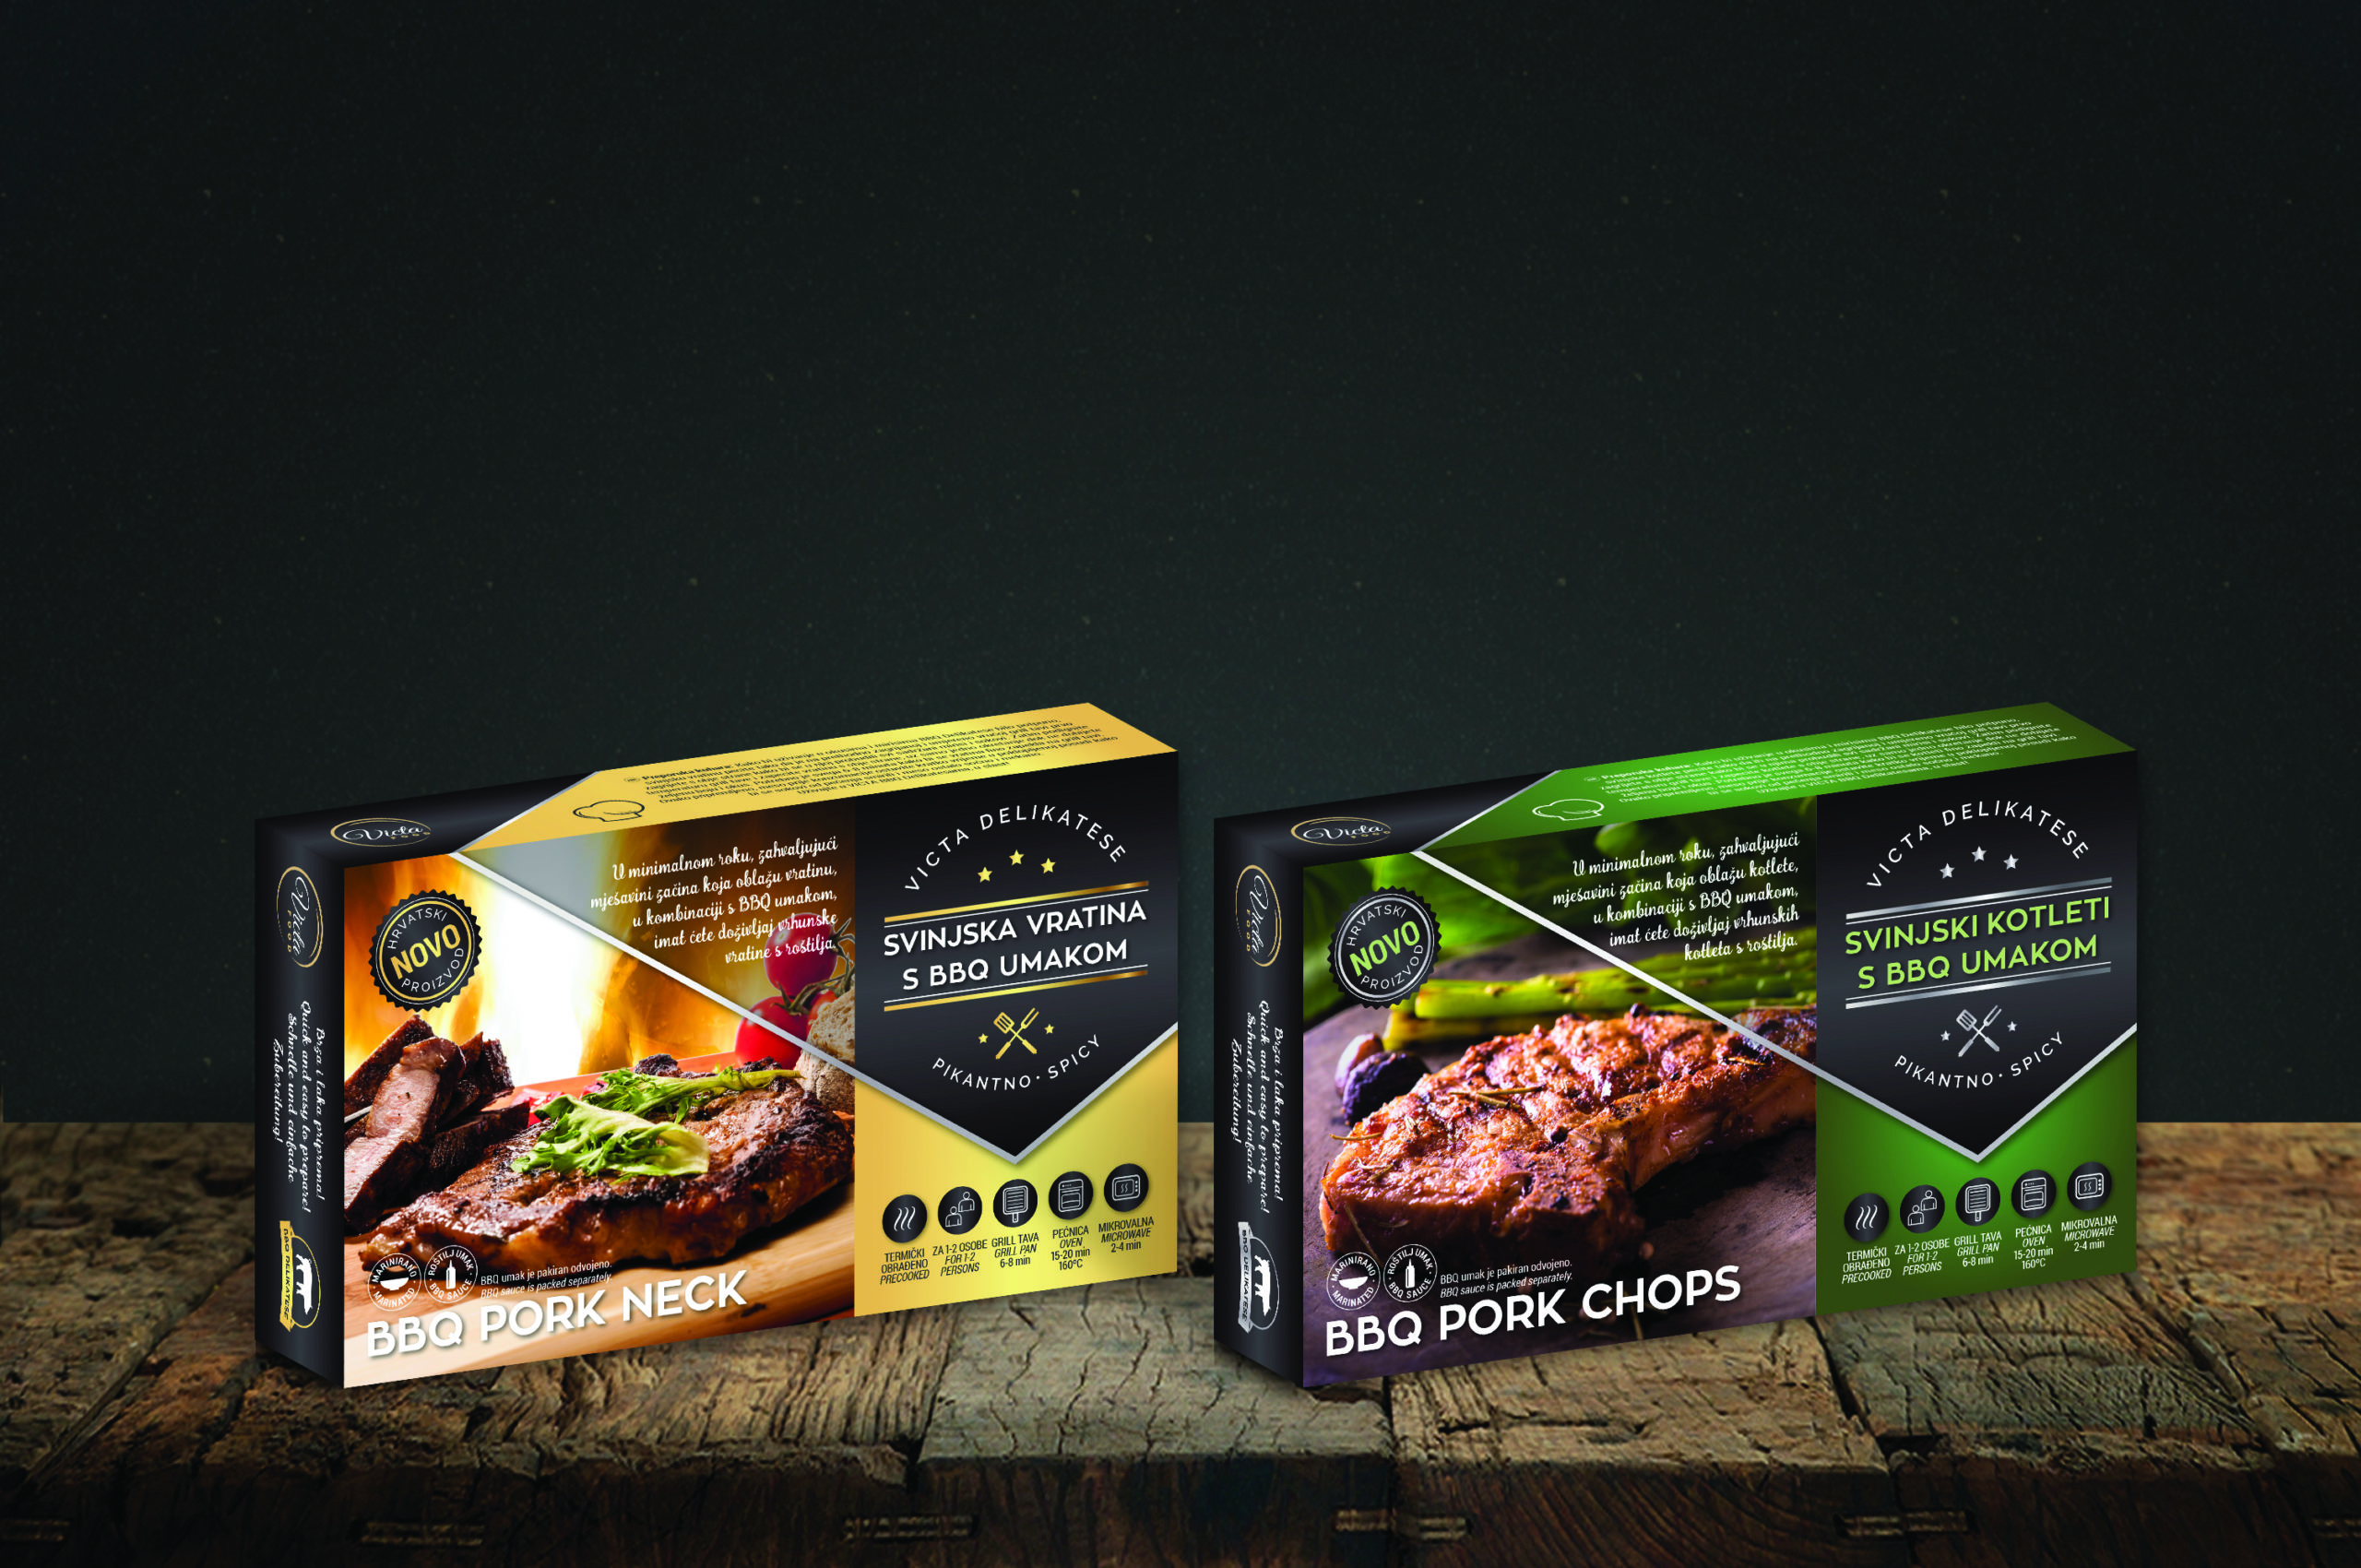 The picture shows two packages of Victa food products. One package is yellow BBQ Pork Neck, the other is green BBQ Pork Chops. The products are placed on a wooden base, and the background is dark gray